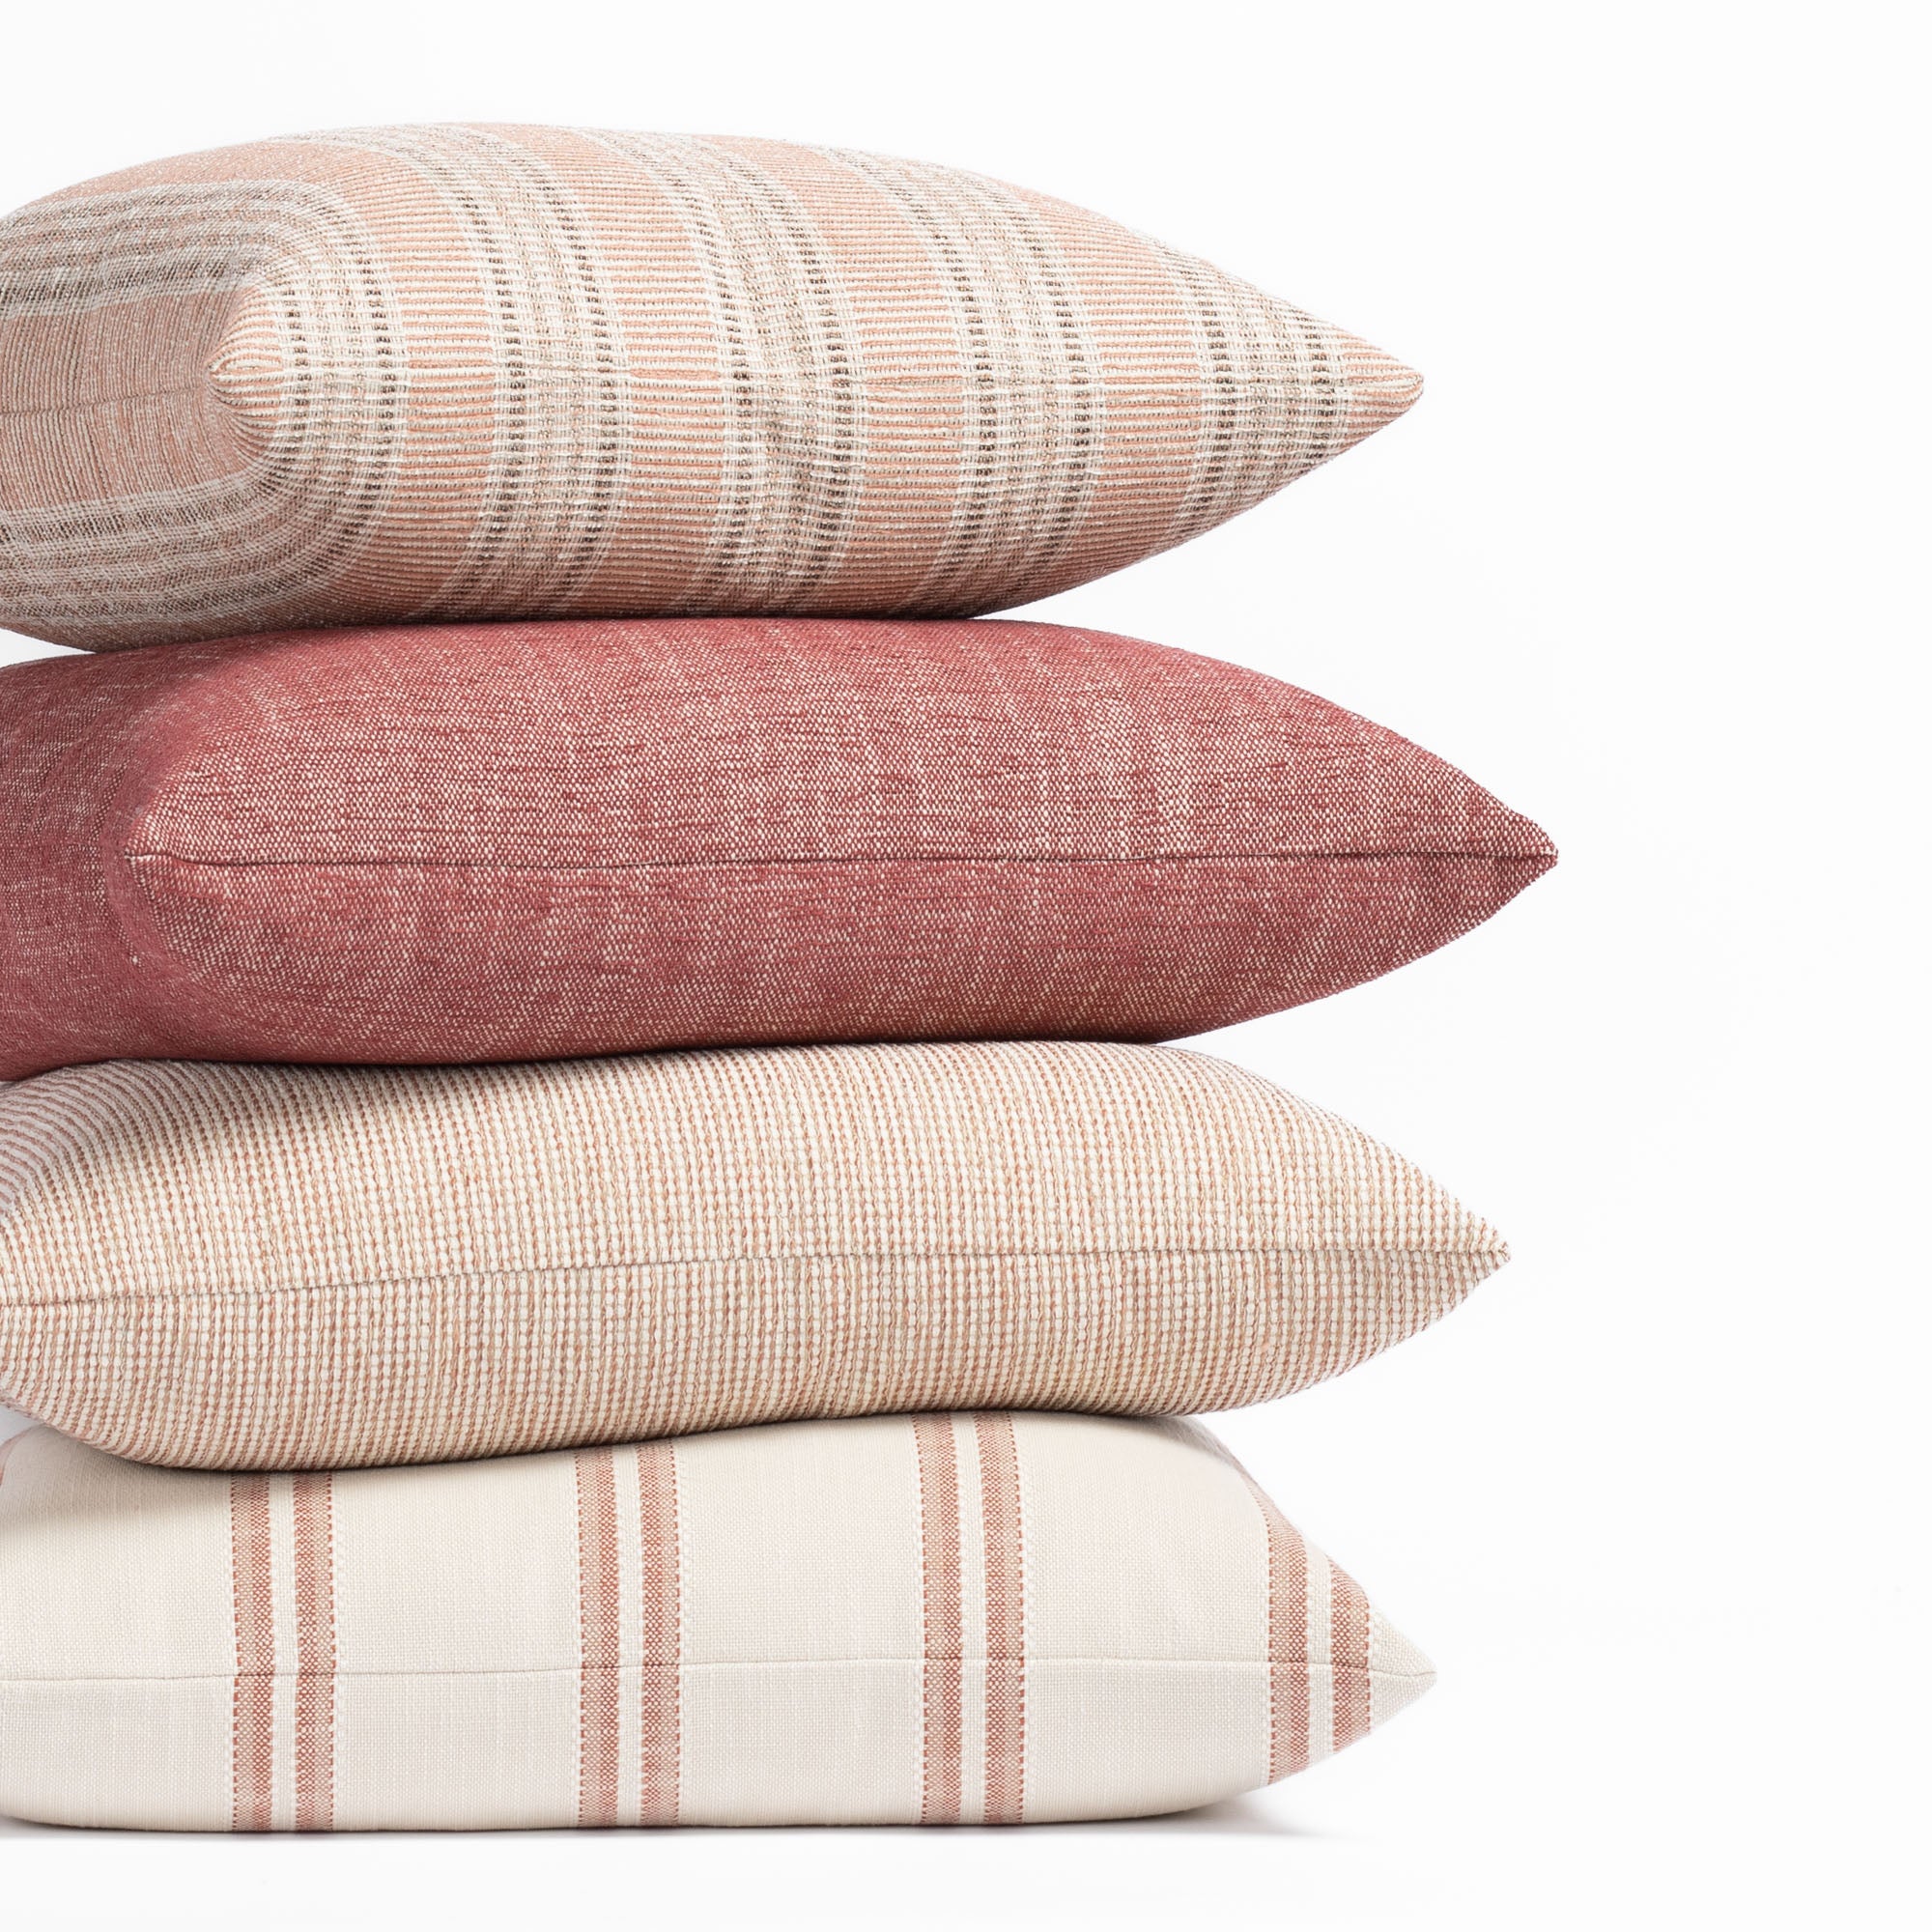 Tonic Living Venetian red and terracotta pink outdoor pillows : Sonoma Stripe, Parker, Aria and Riviera Stripe Clay pillows